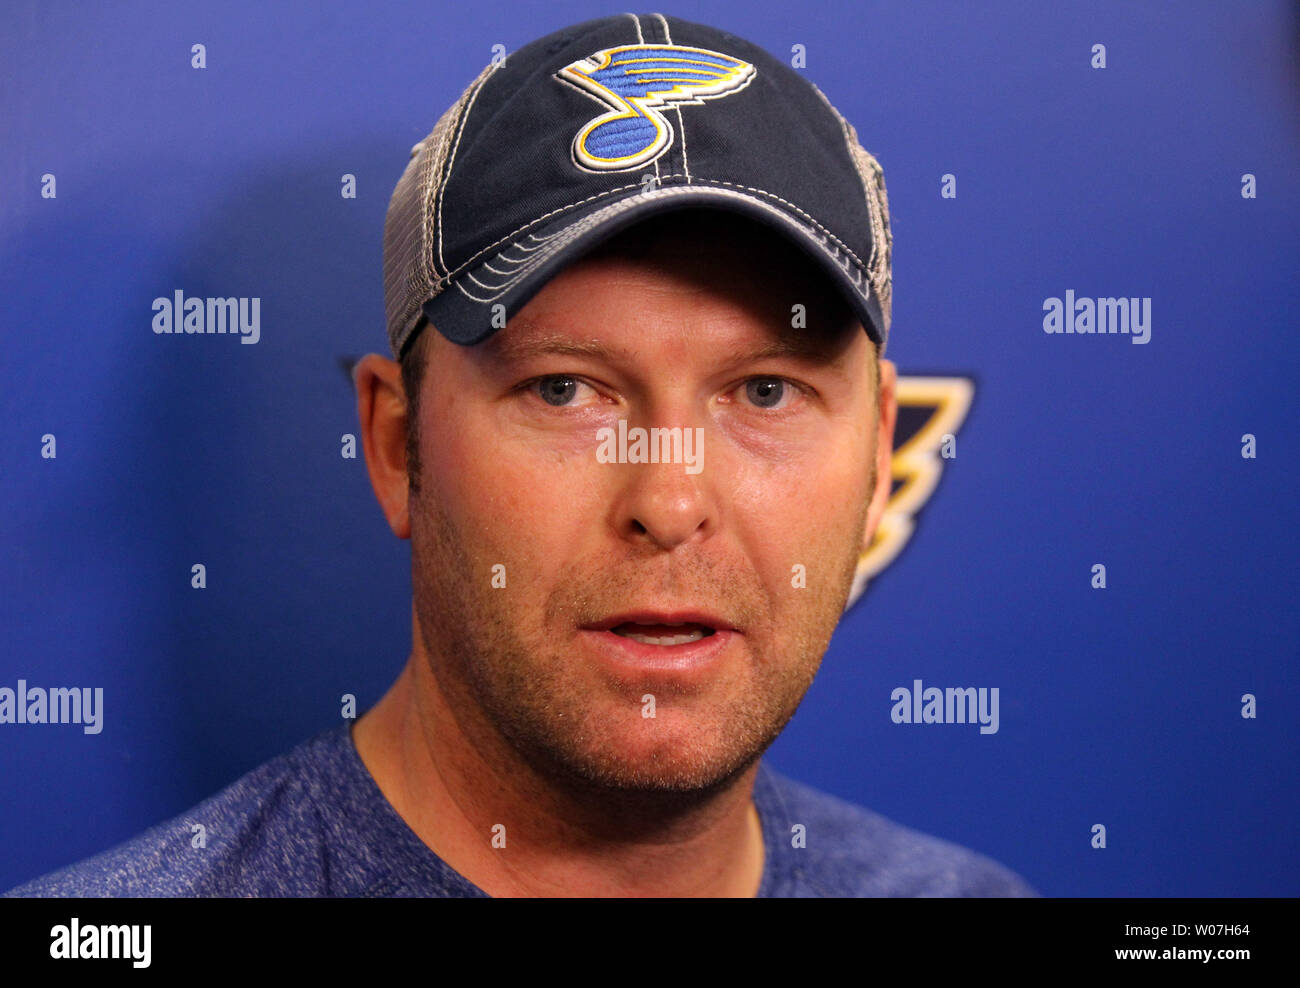 Martin Brodeur, 42, starts in goal for Blues vs. Avalanche – The